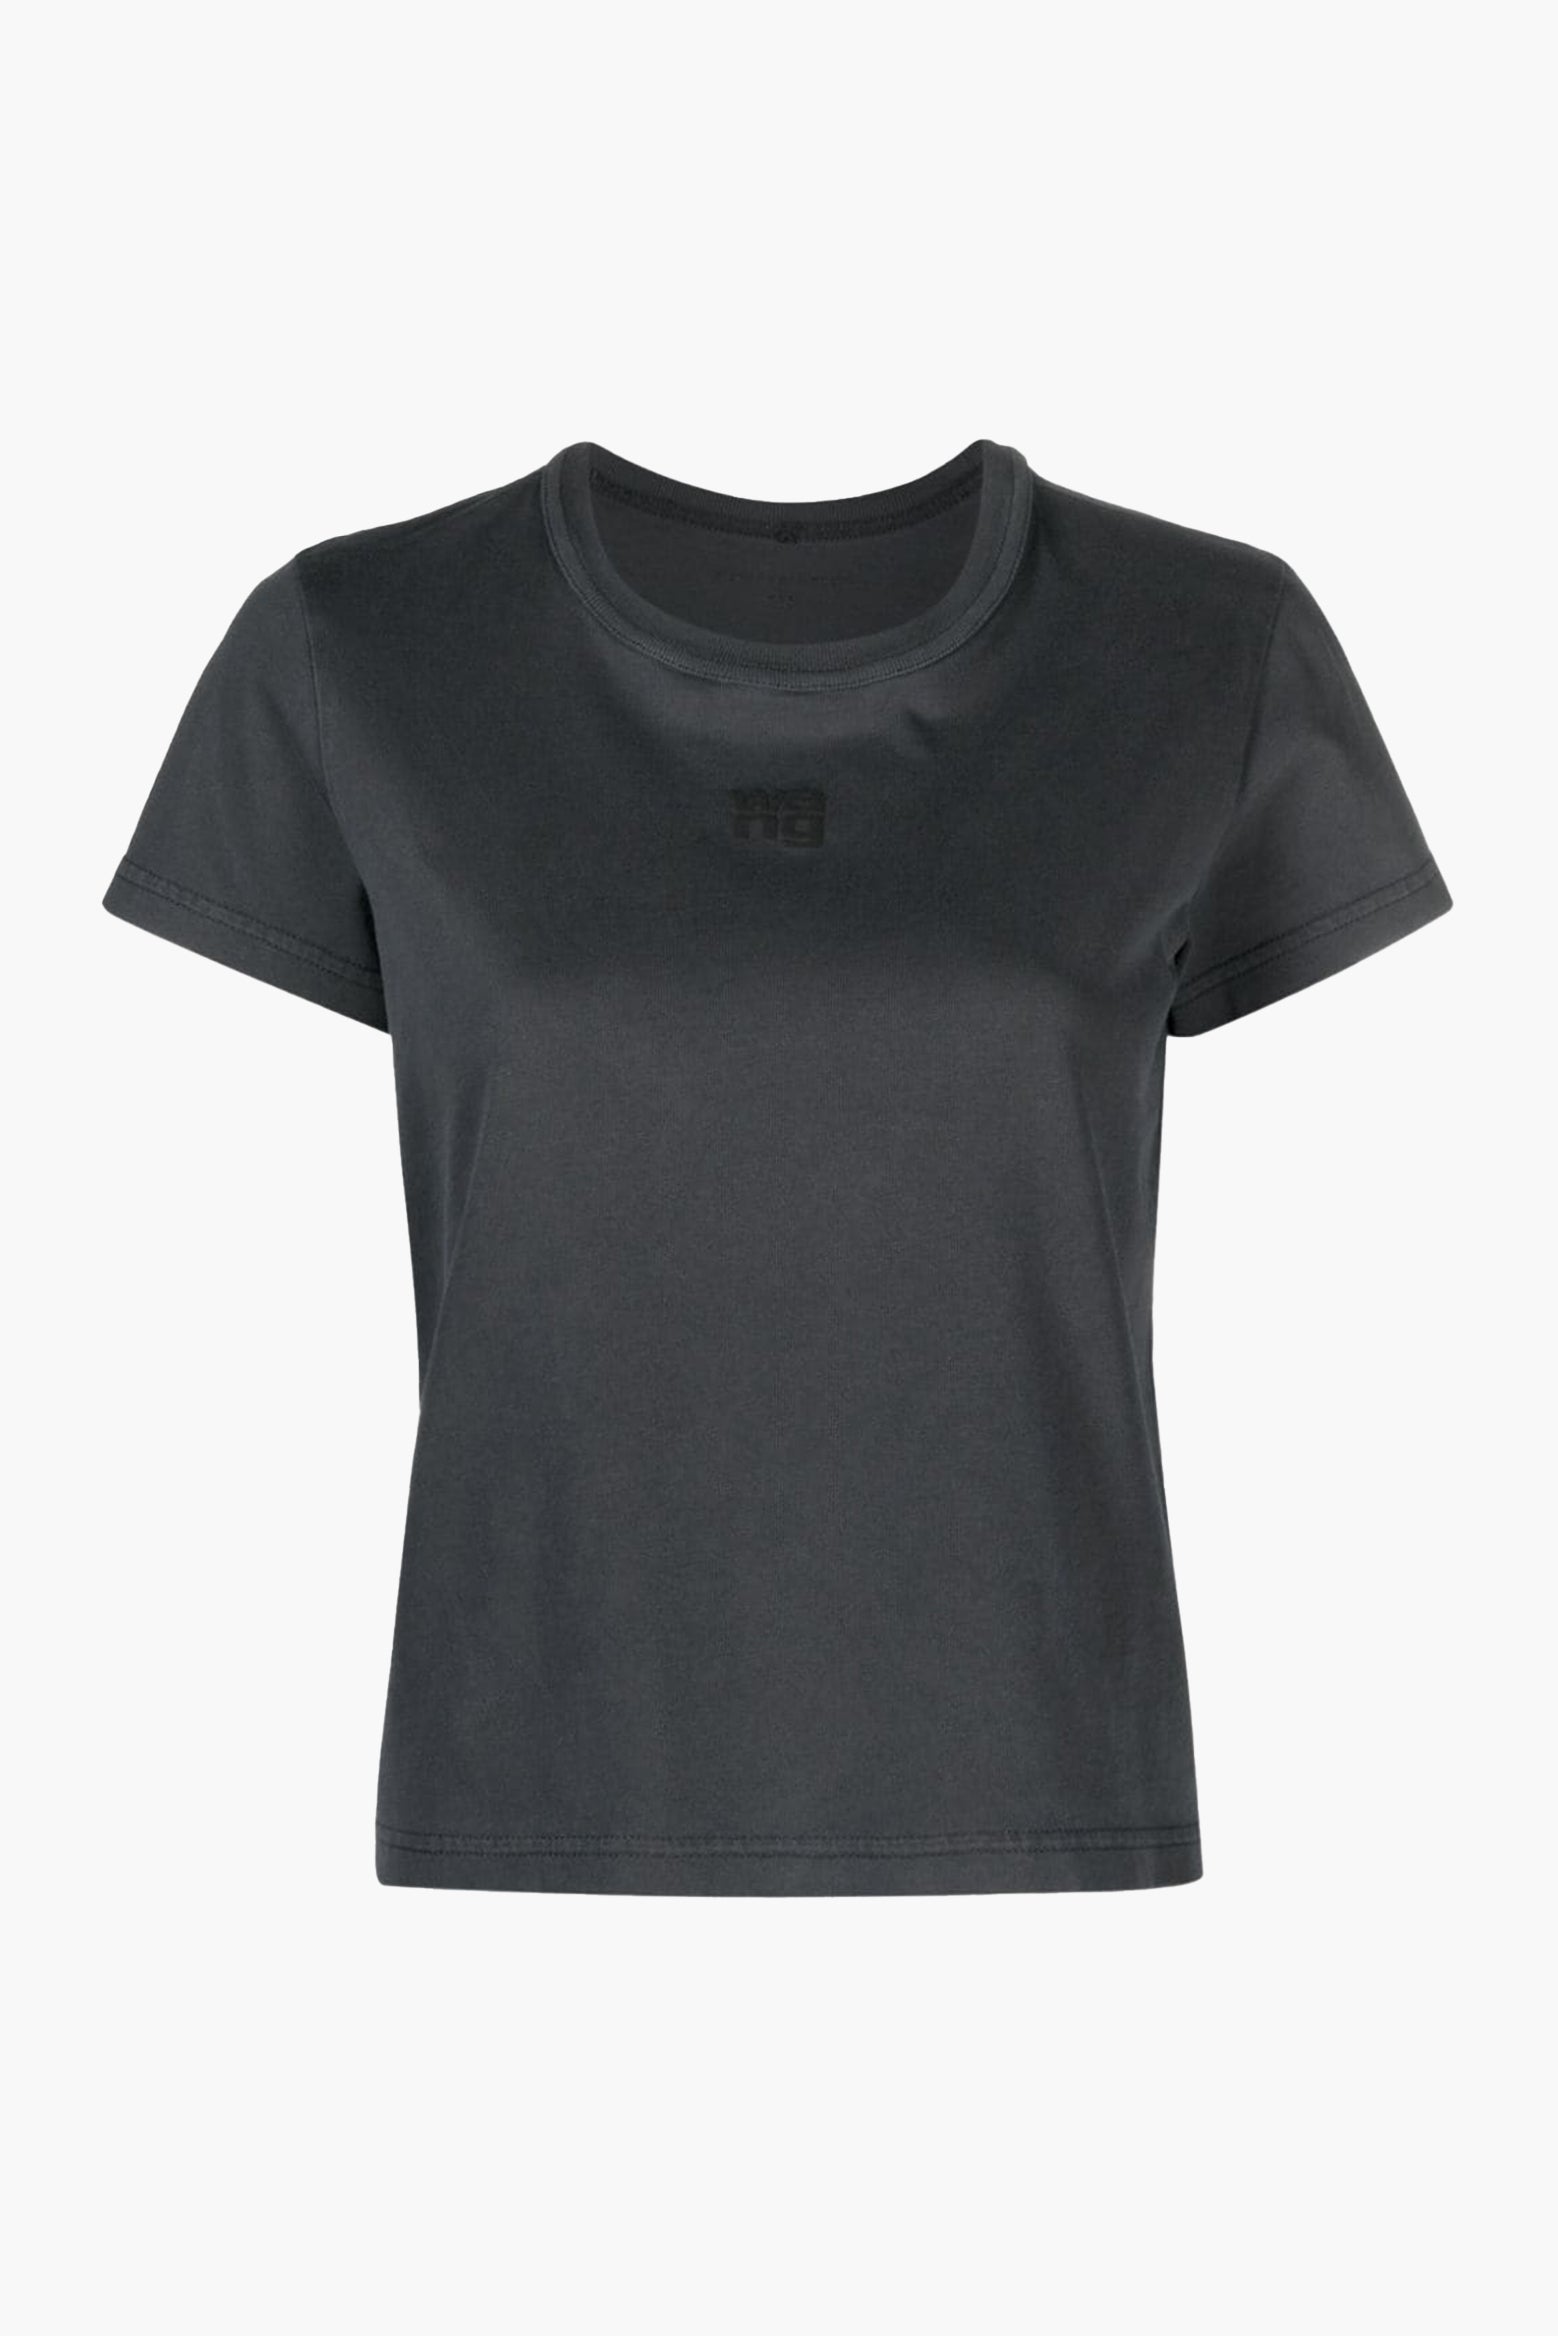 The Alexander Wang Esssential JSY Shrunk Tee W Puff Logo And Bound Neck in Soft Obsidian available at The New Trend Australia